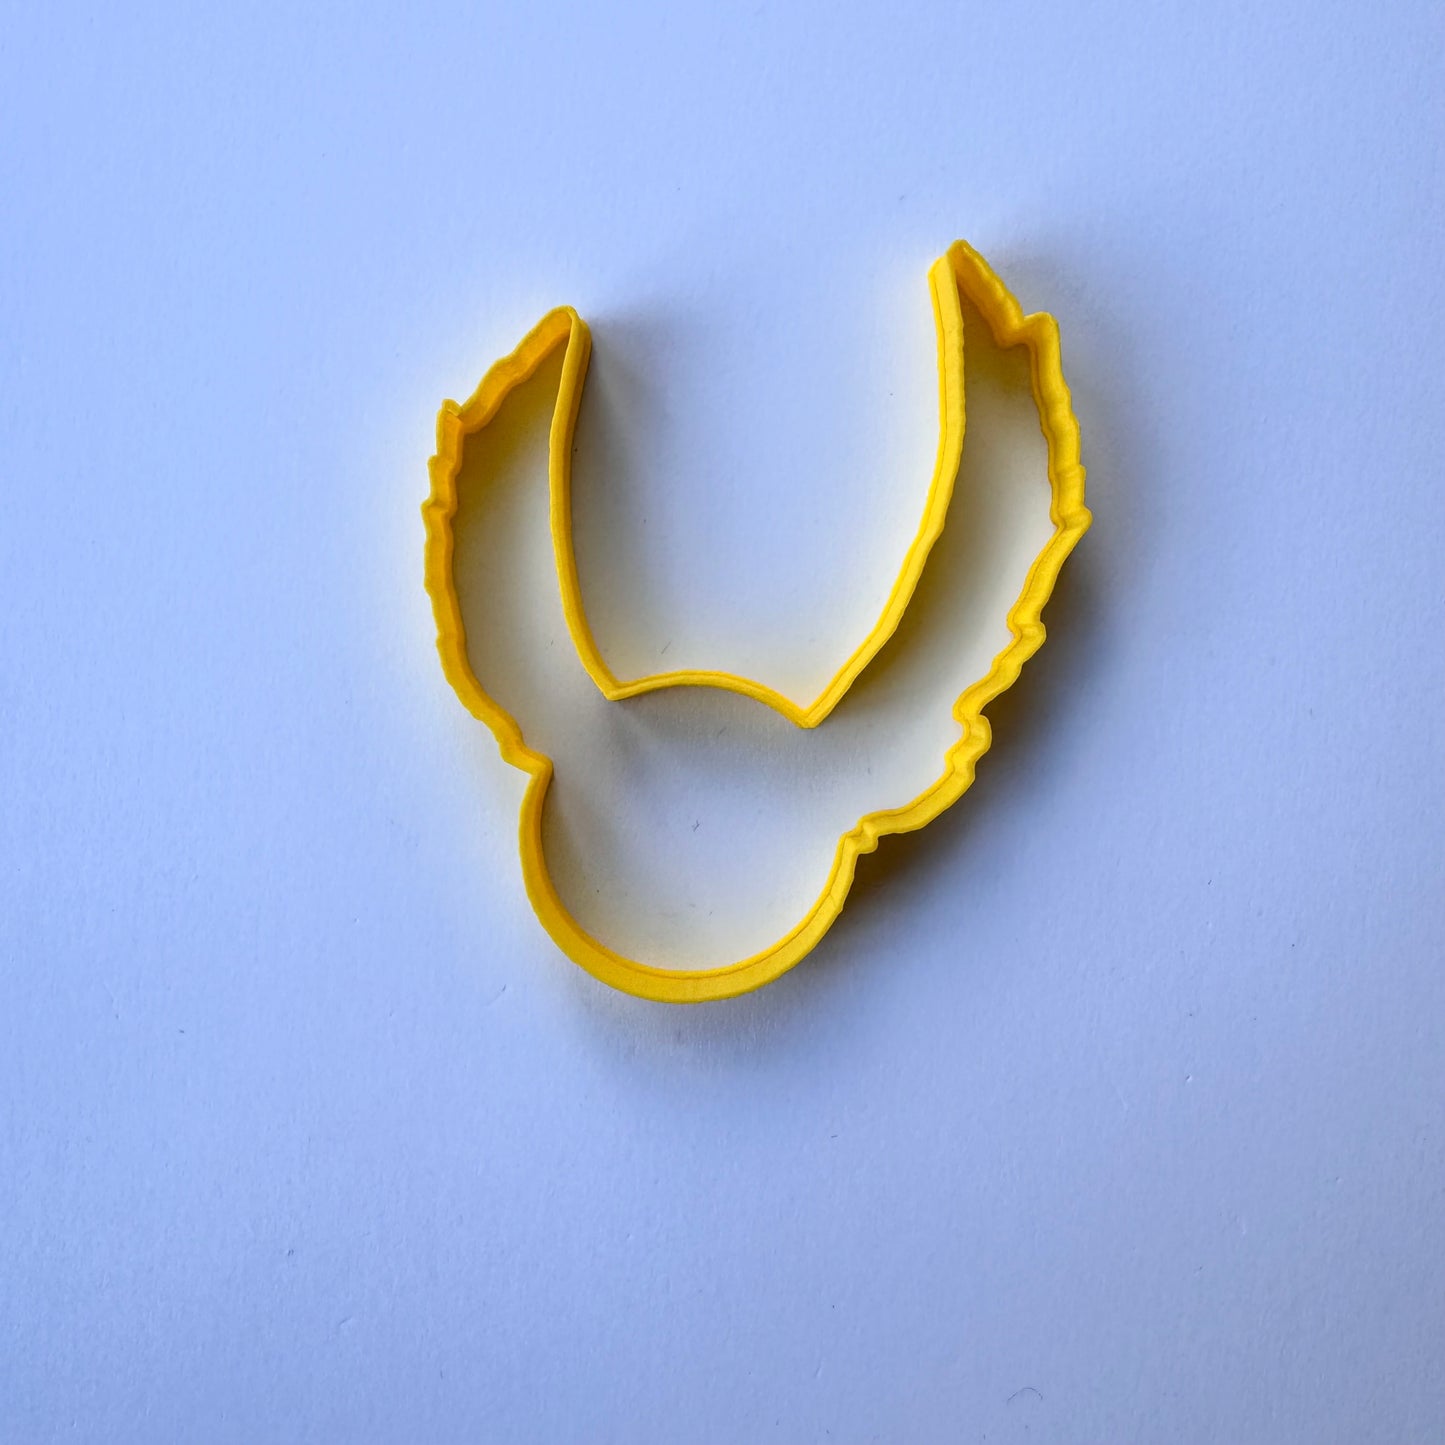 Golden snitch Harry Potter-inspired - Cookie cutter